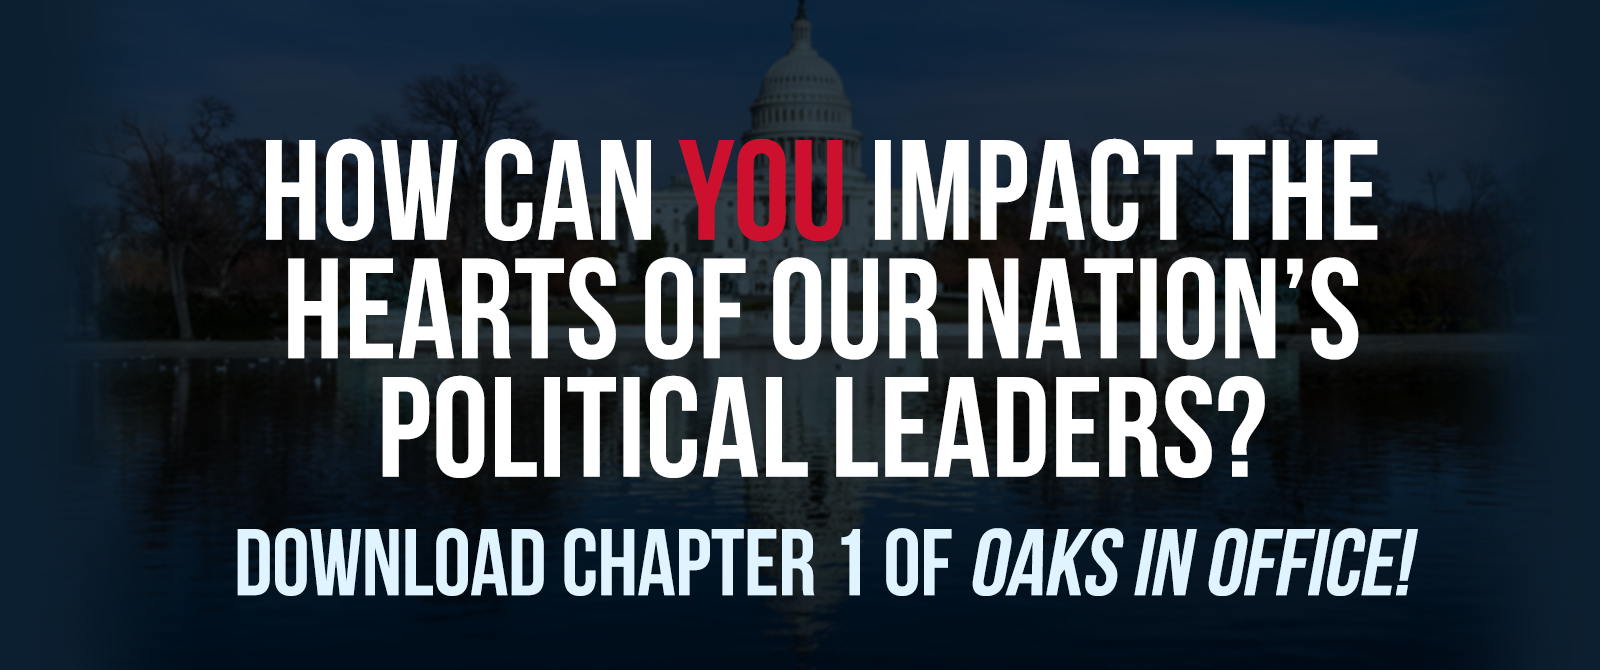 How can YOU impact the hearts of our nation's political leaders? Give them a copy of Oaks in Office.